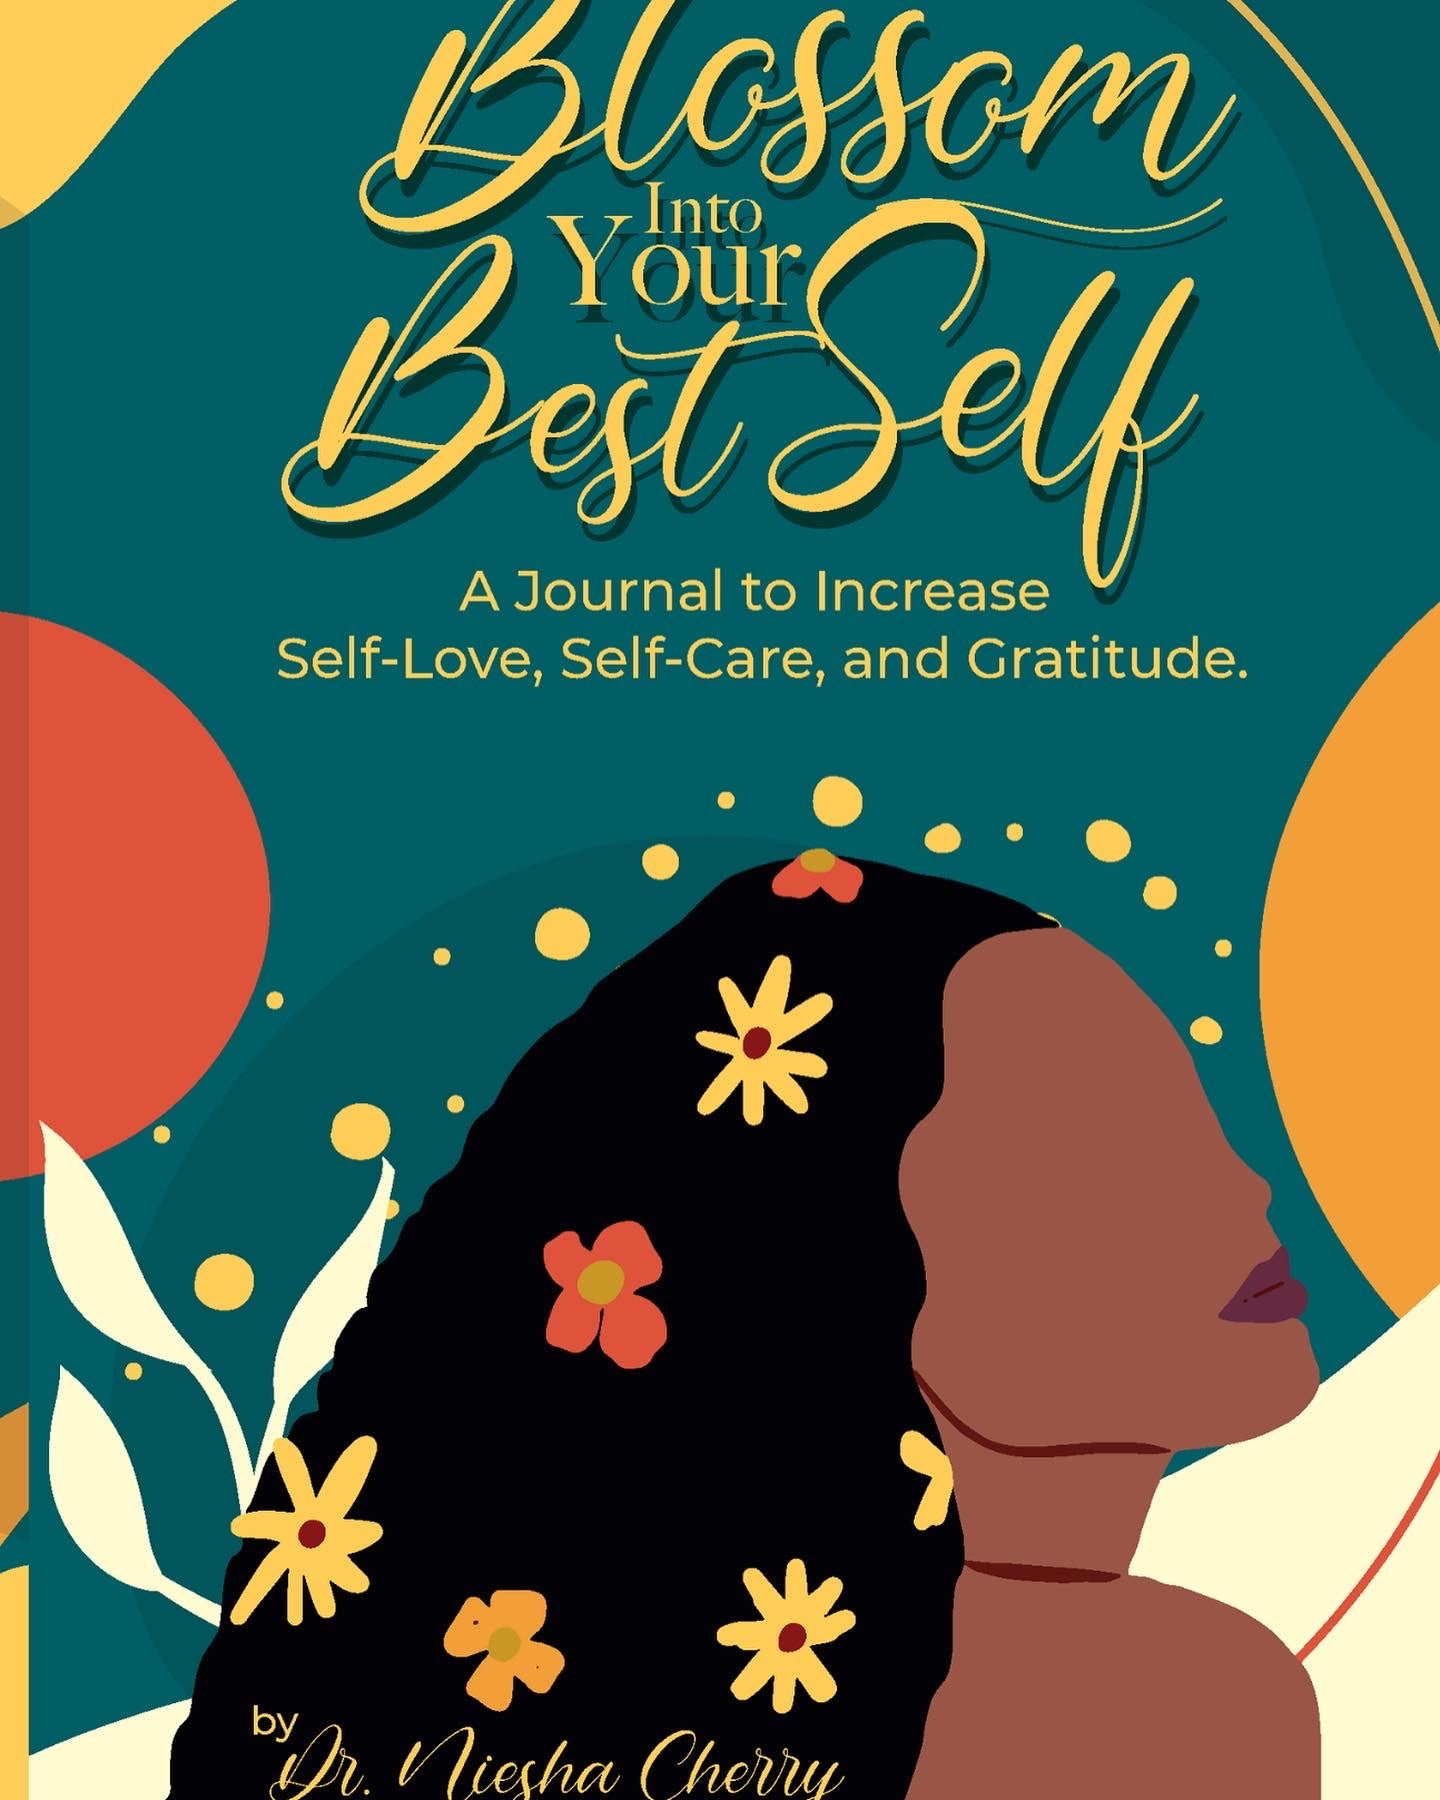 Blossom Into Your Best Self: A Journal to Increase Self-Love, Self-Care, and Gratitude